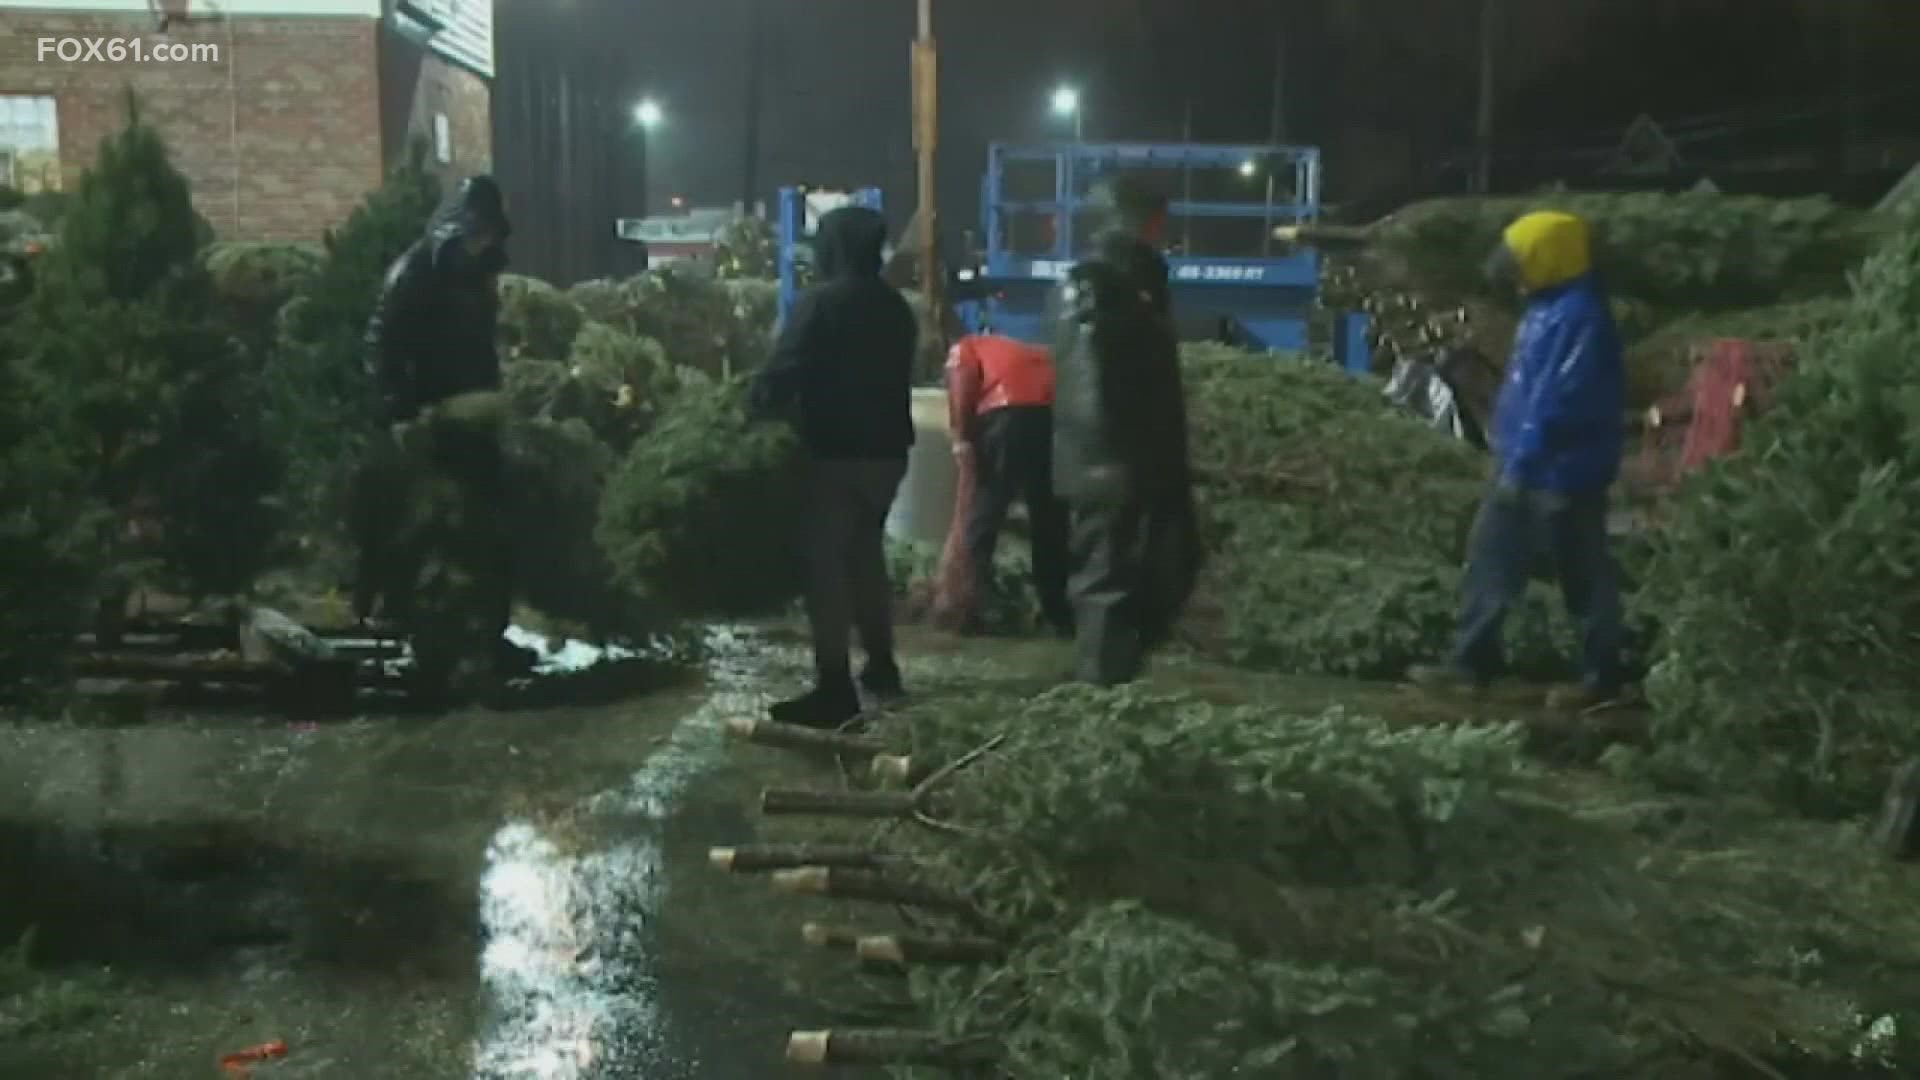 Vendors across Connecticut and the nation have been hit by the Christmas tree shortage for a number of reasons.